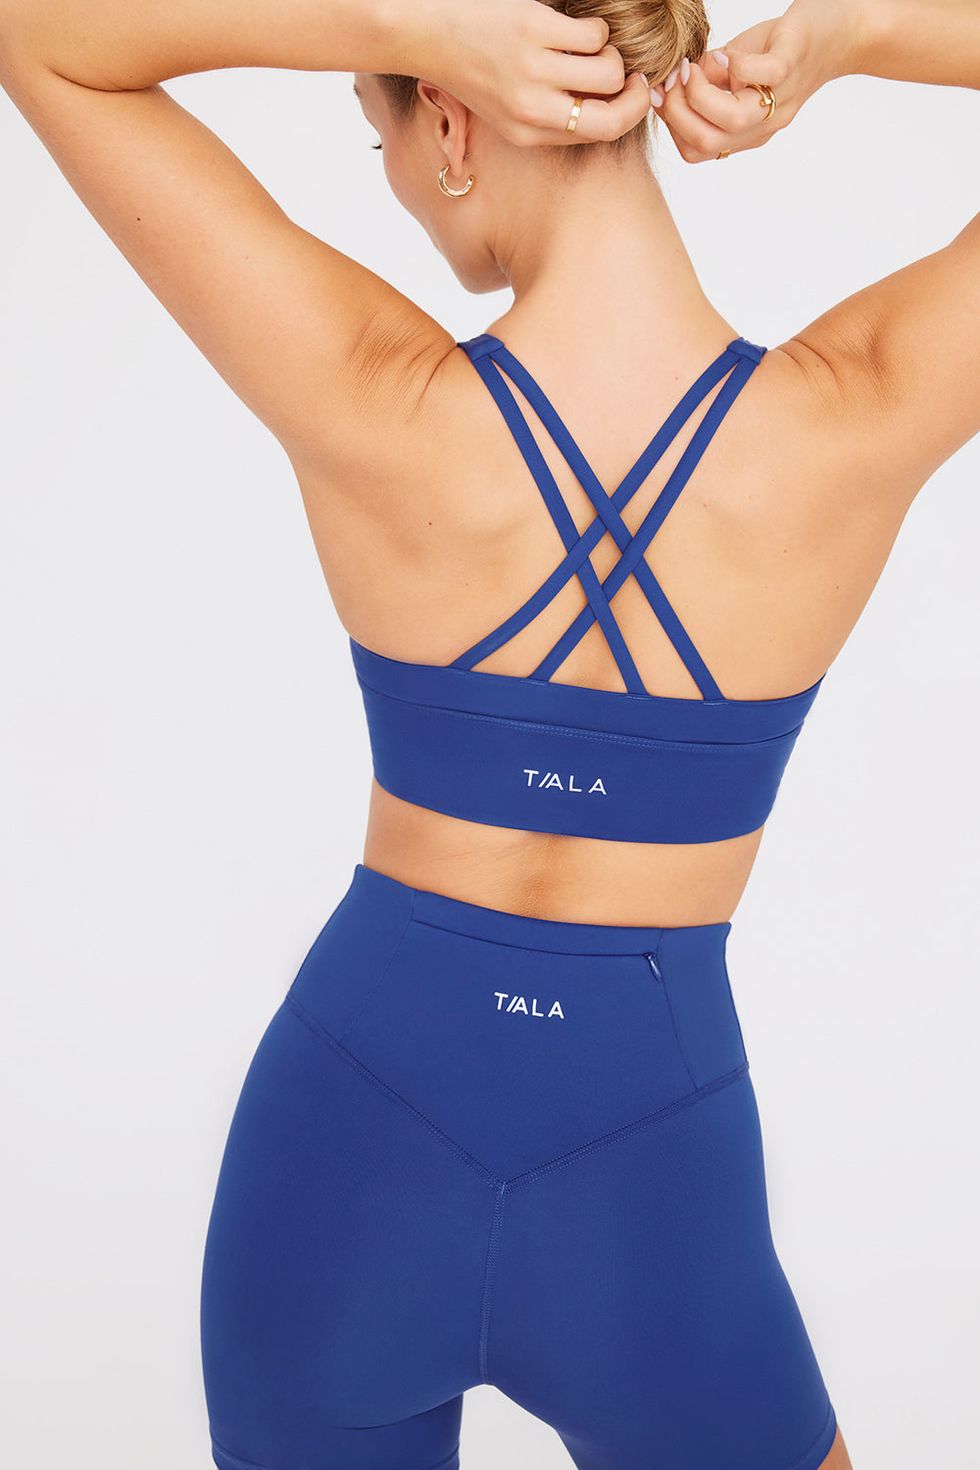 TALA's Cyber Monday sale: all the deals we're shopping for 2023